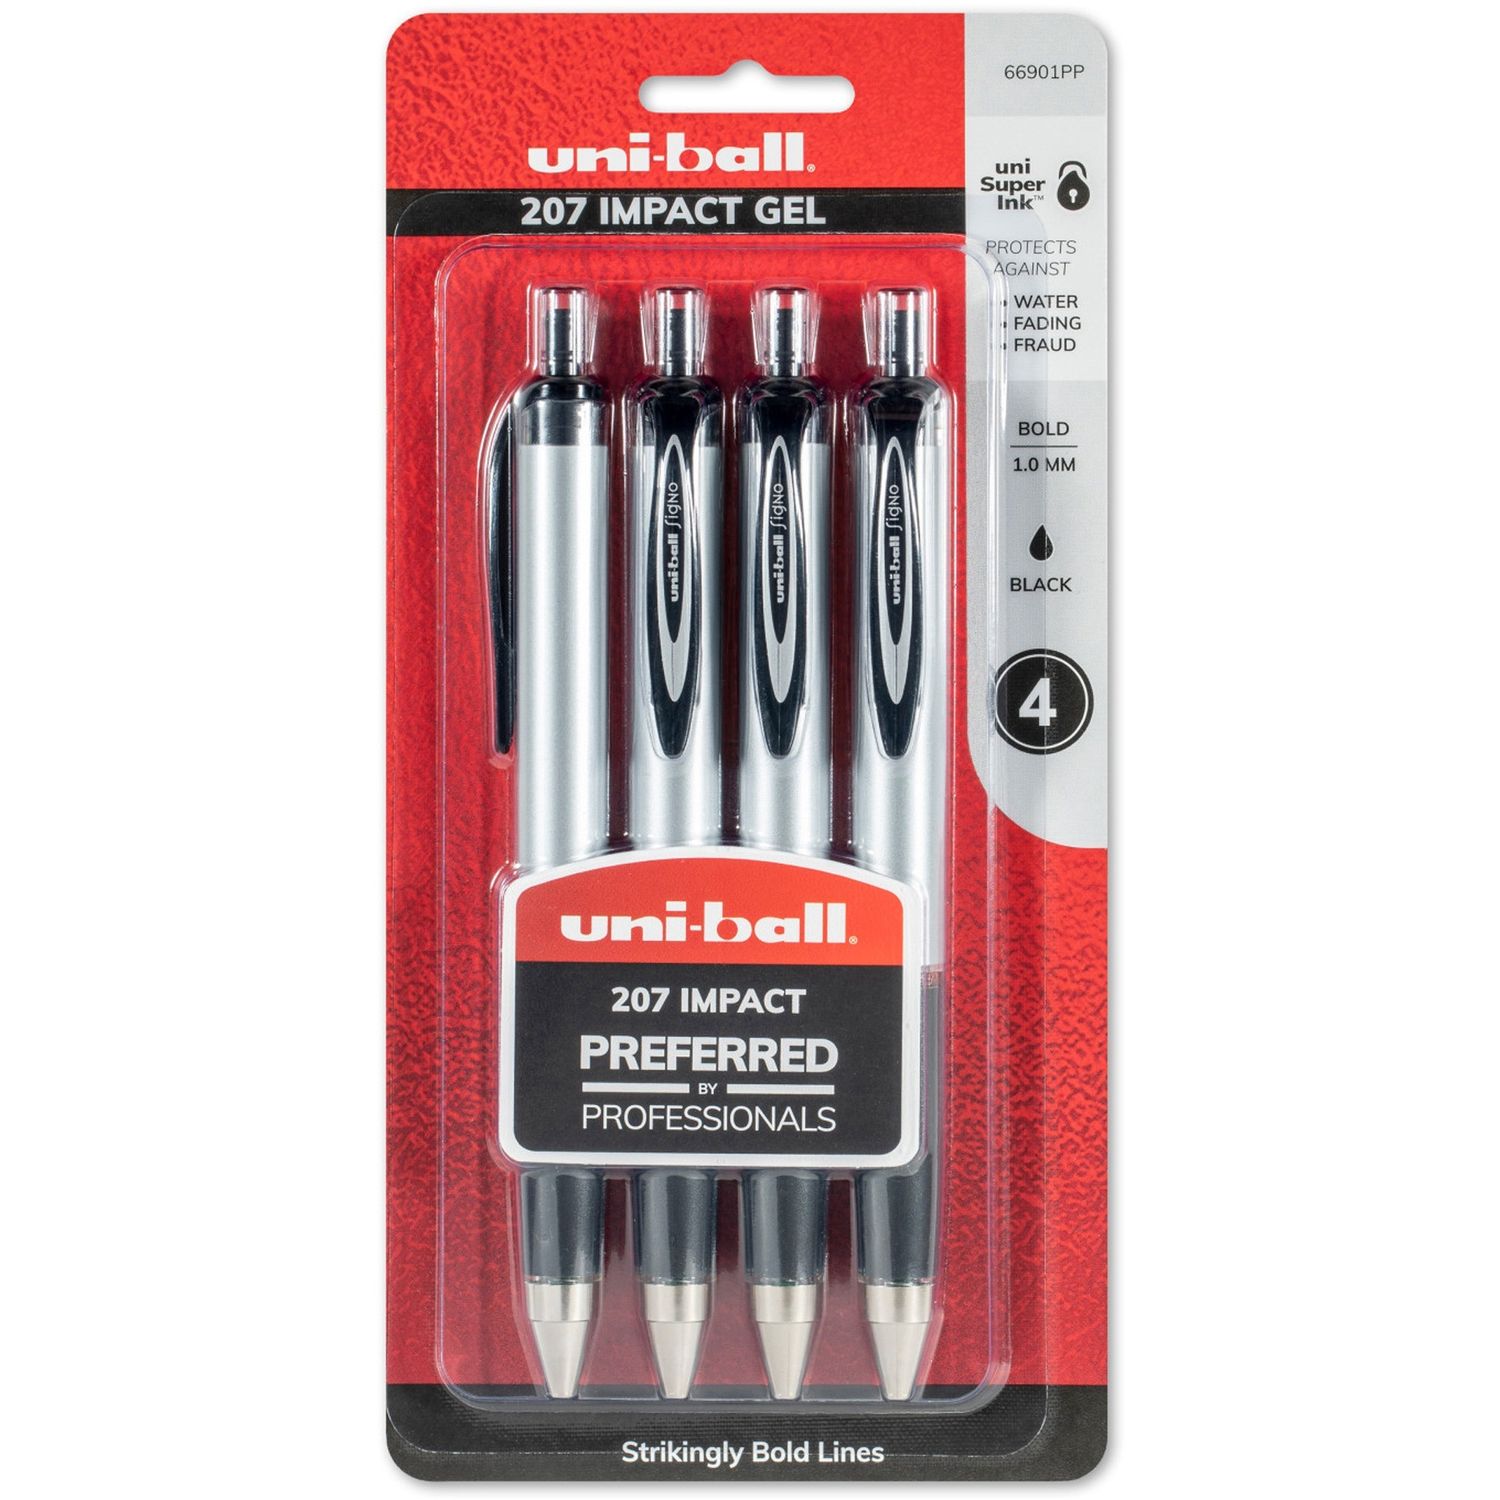 207 Gel Impact Retractable Bold Pen Point, 1 mm Pen Point Size, Refillable, Retractable, Black Gel-based Ink, 4 / Pack